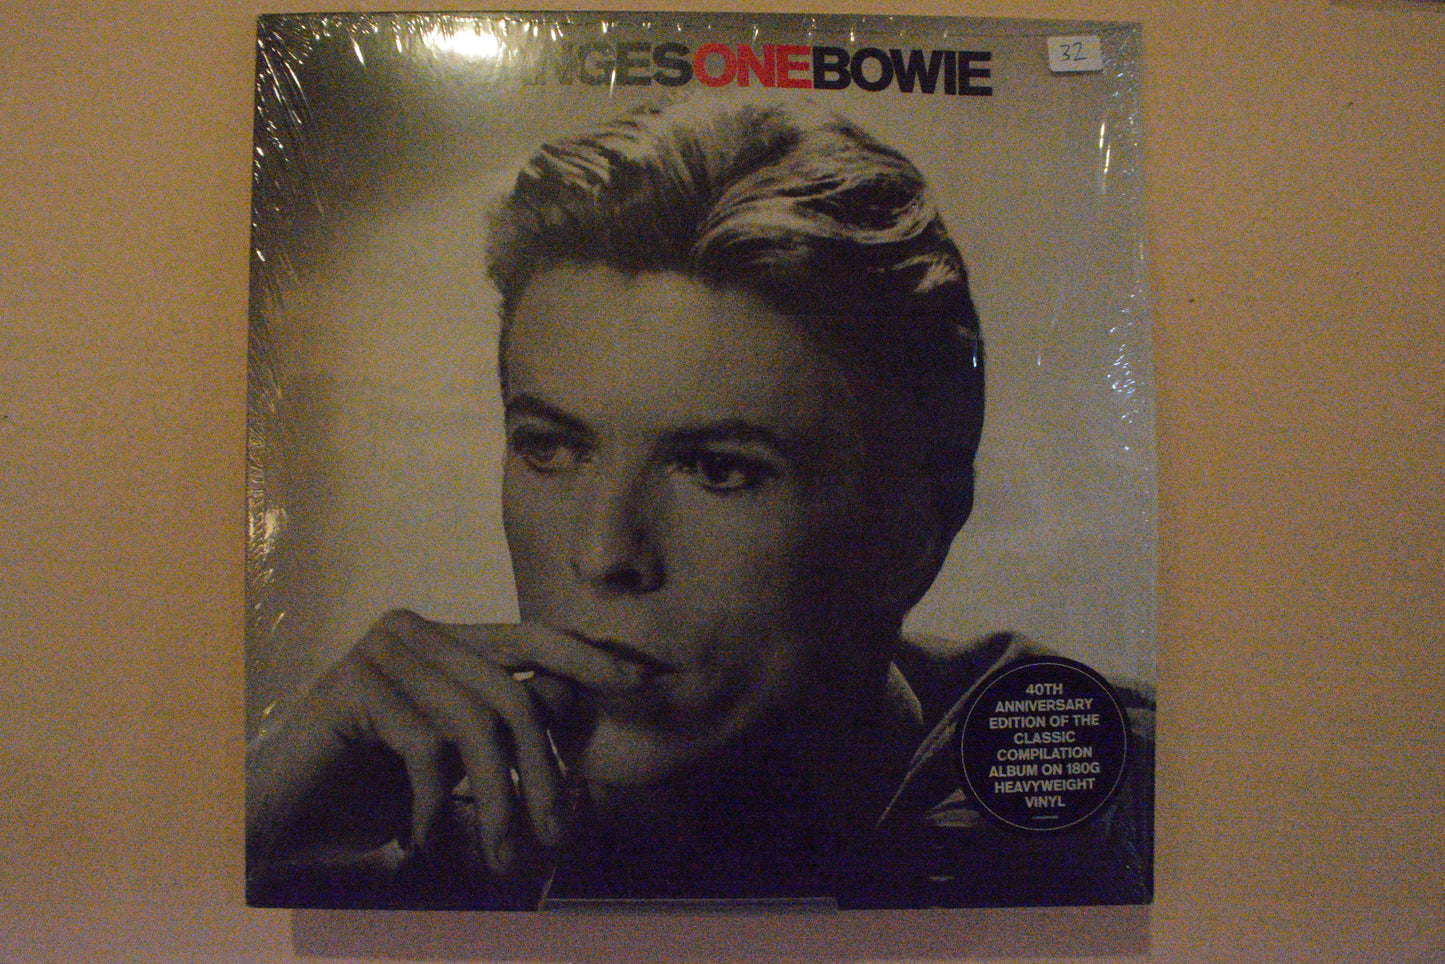 David Bowie - Changes: One